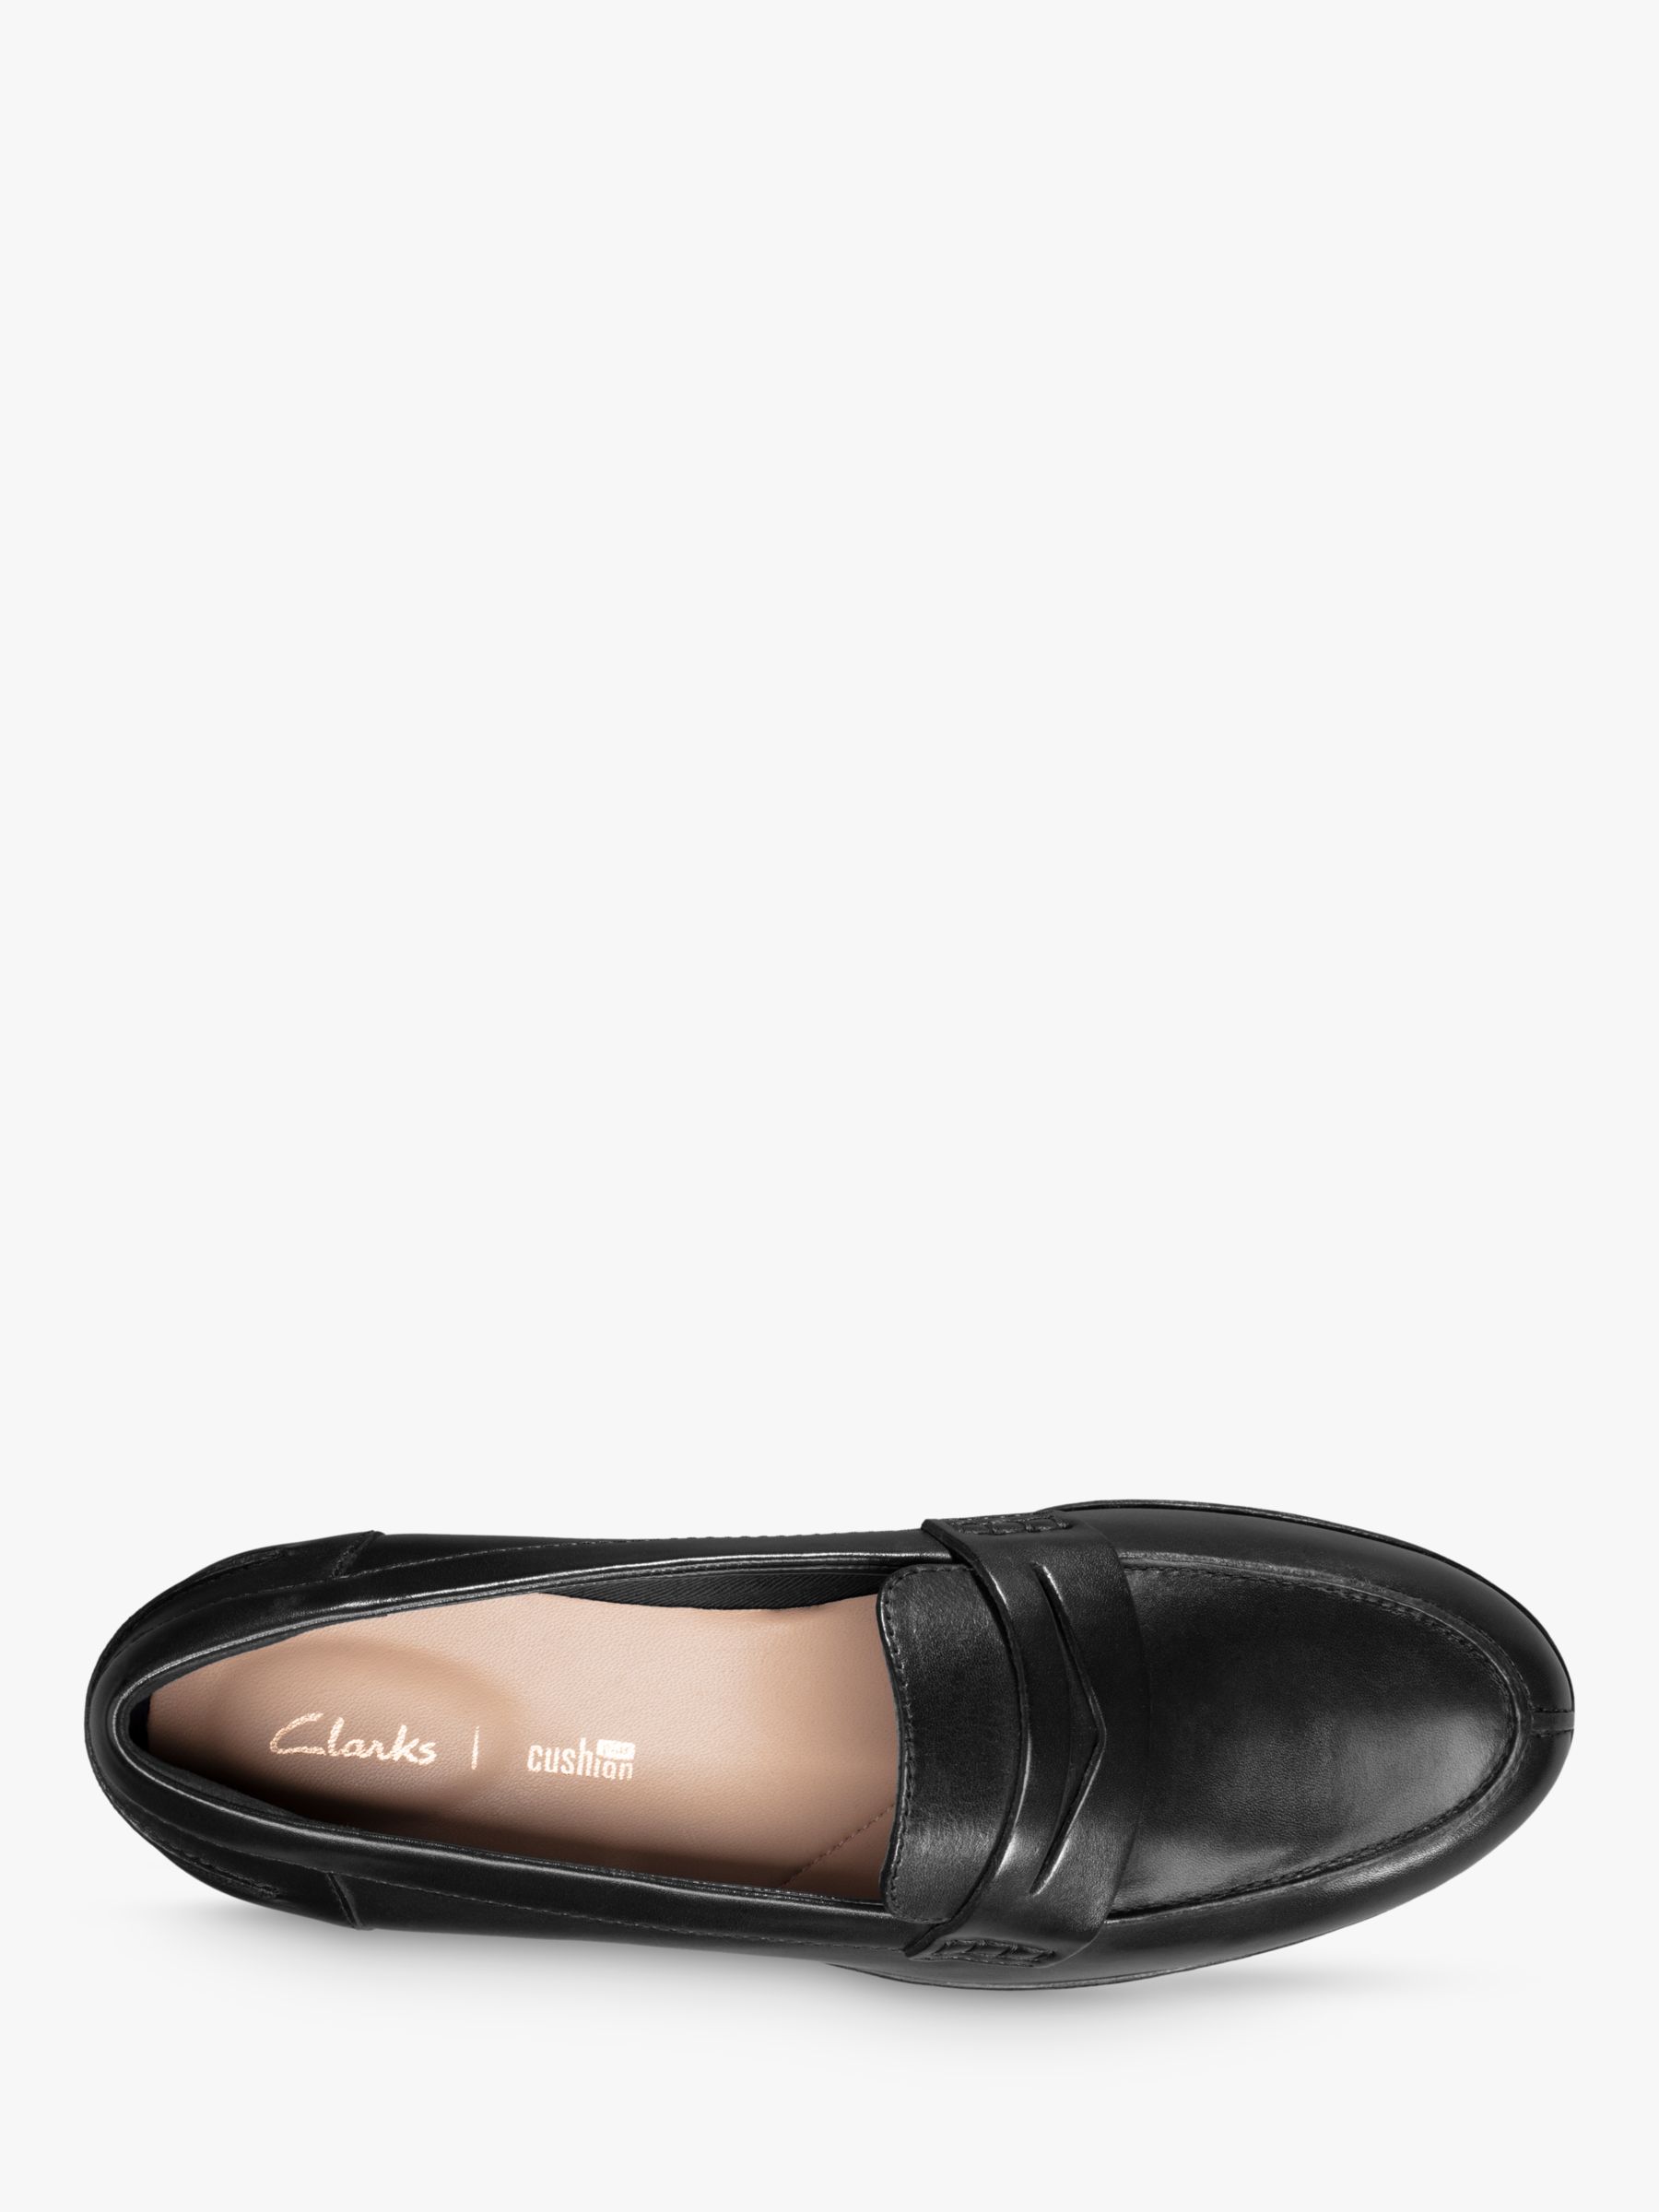 Clarks Hamble Leather Loafers, Black at John Lewis & Partners